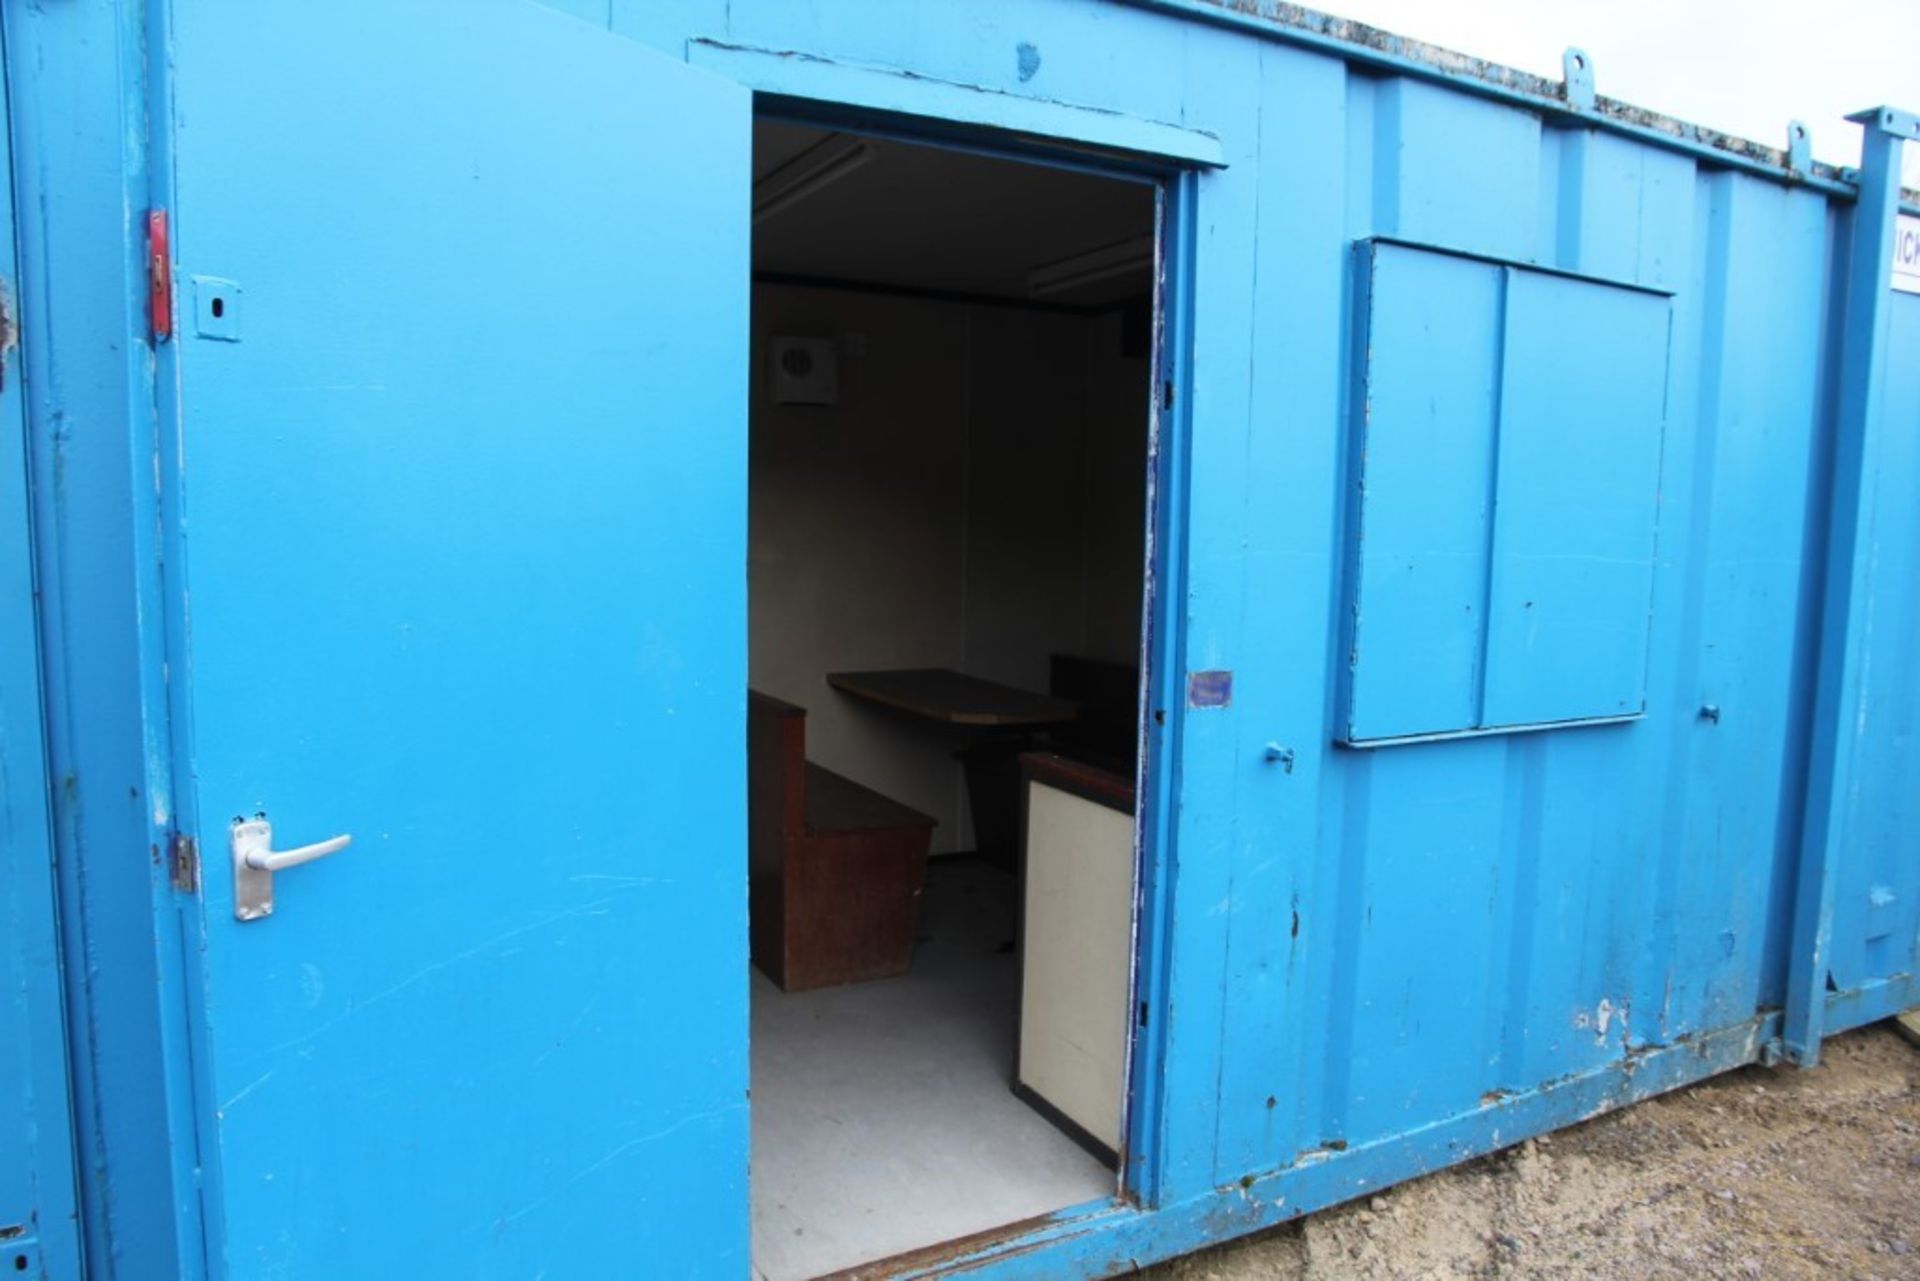 Secure Site Welfare Cabin / Portable Building with Generator - Image 15 of 25